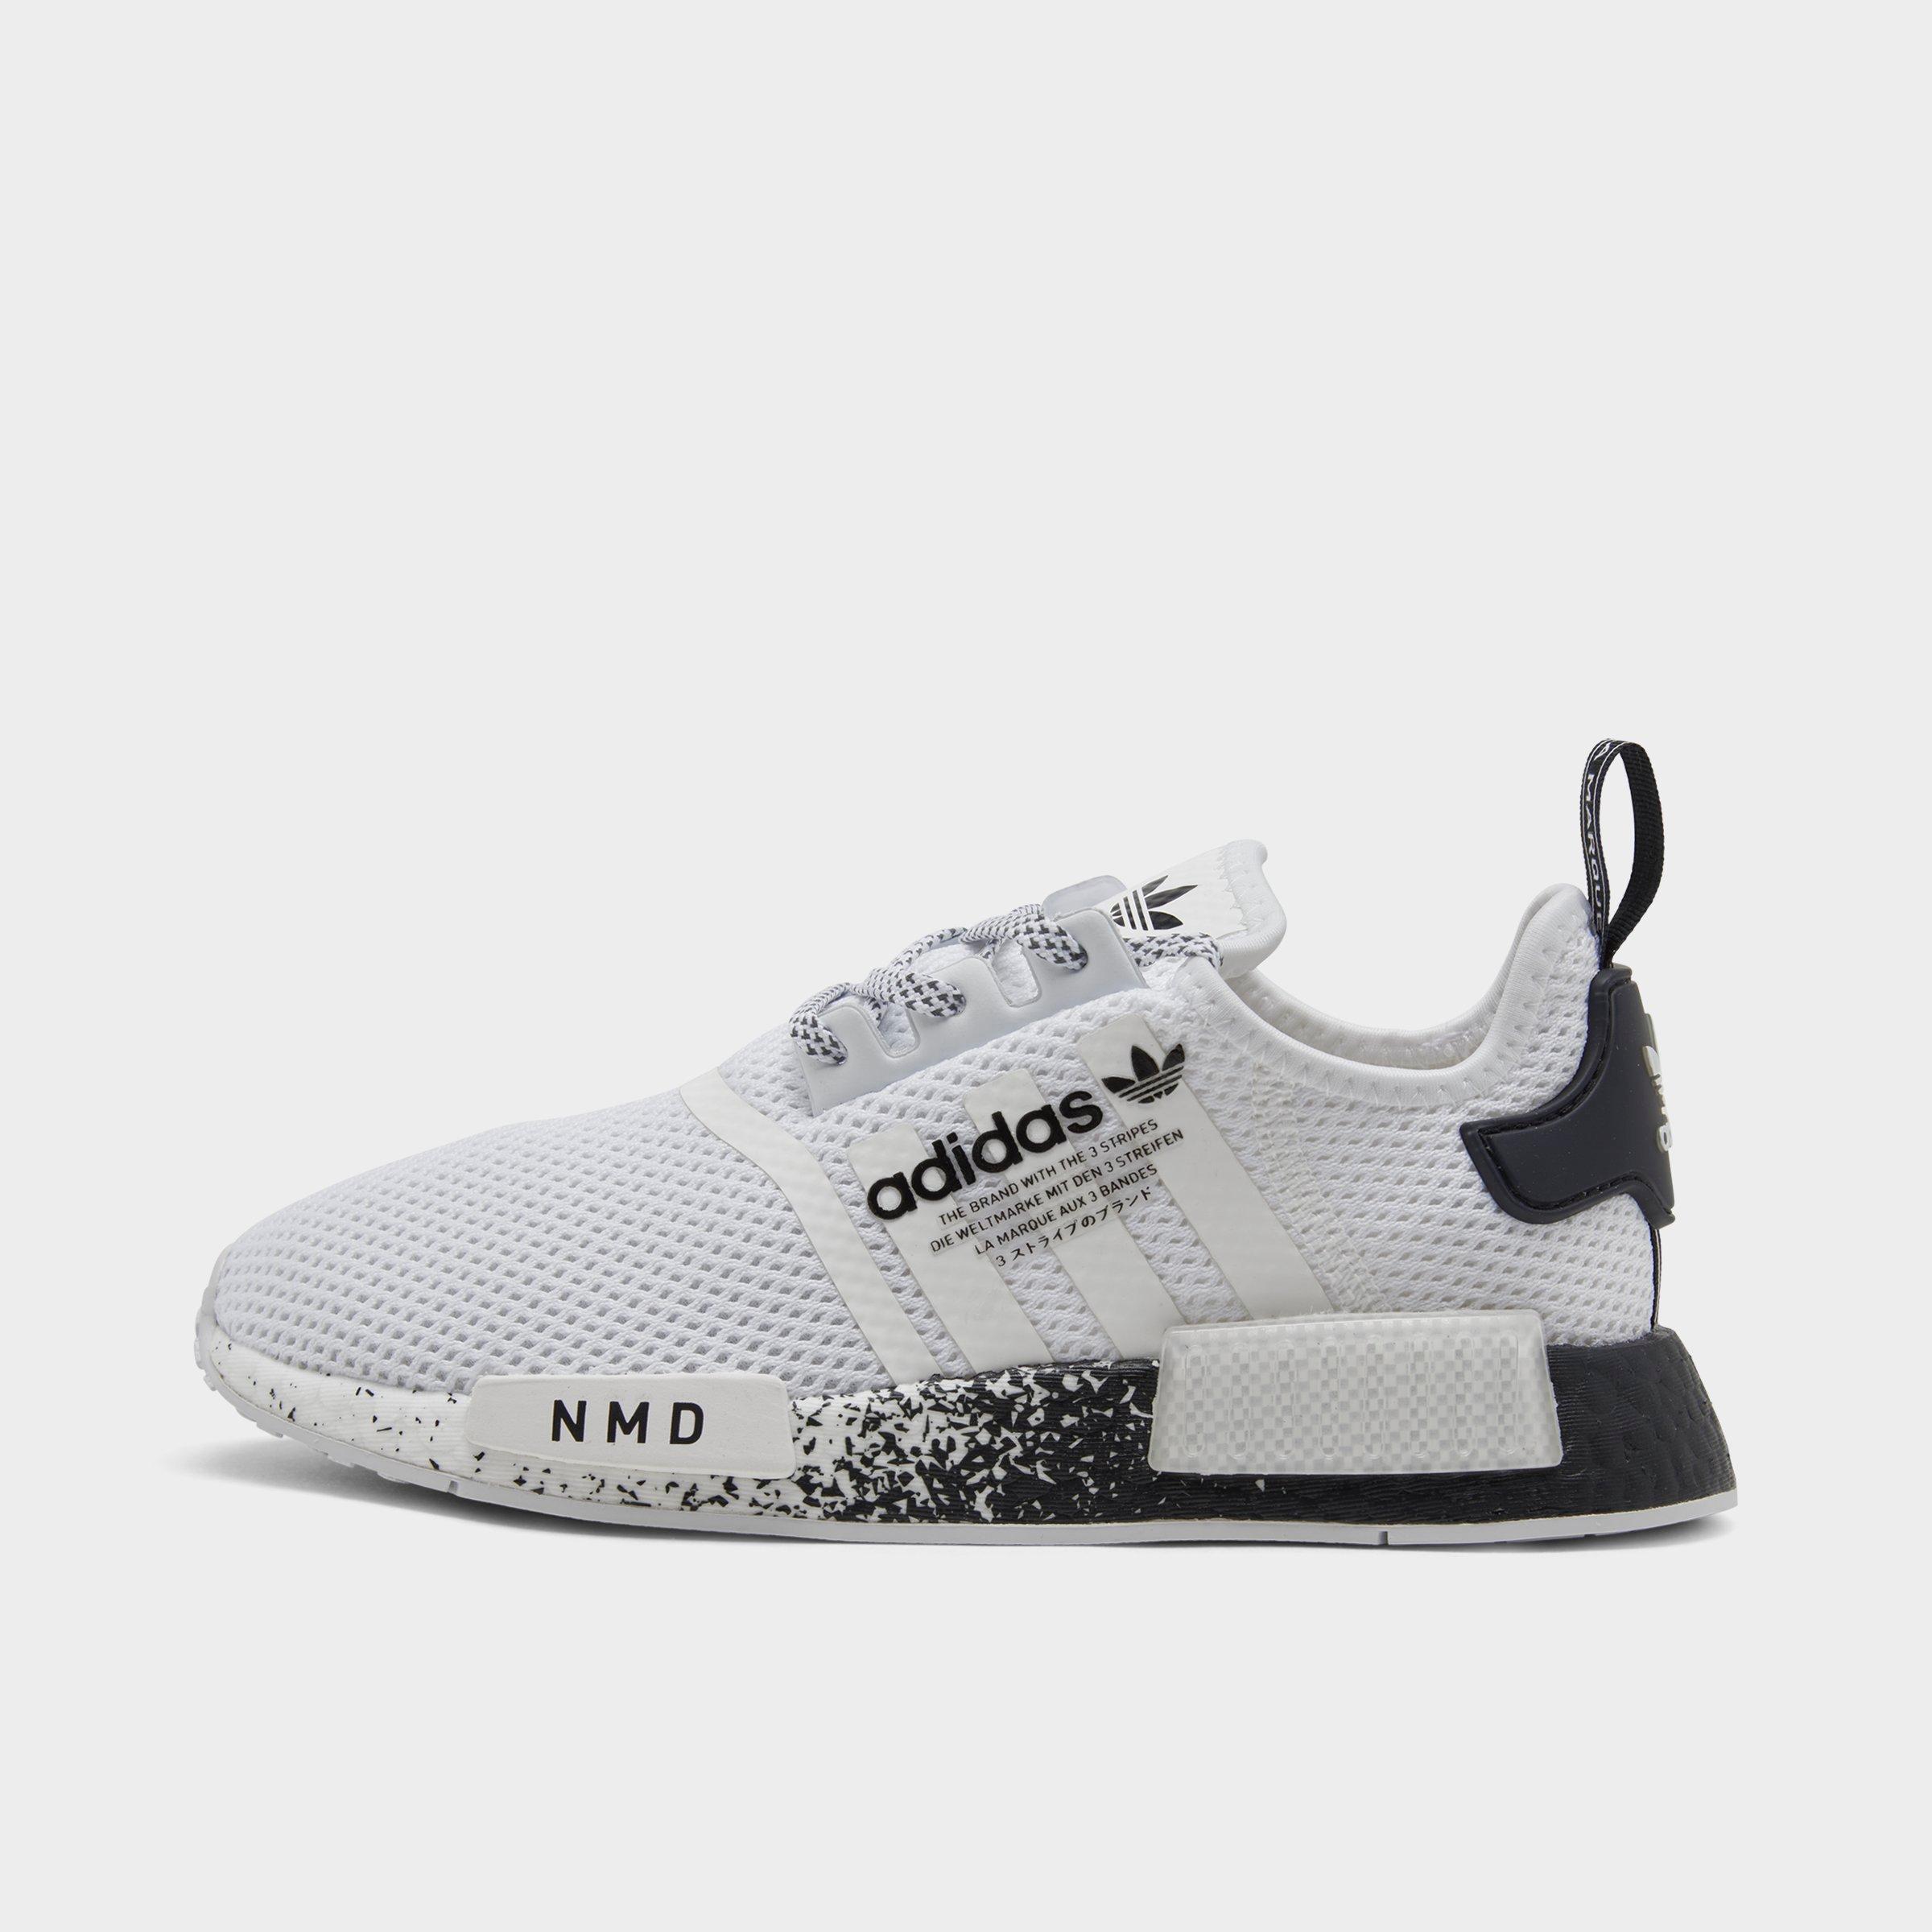 nmds size 4